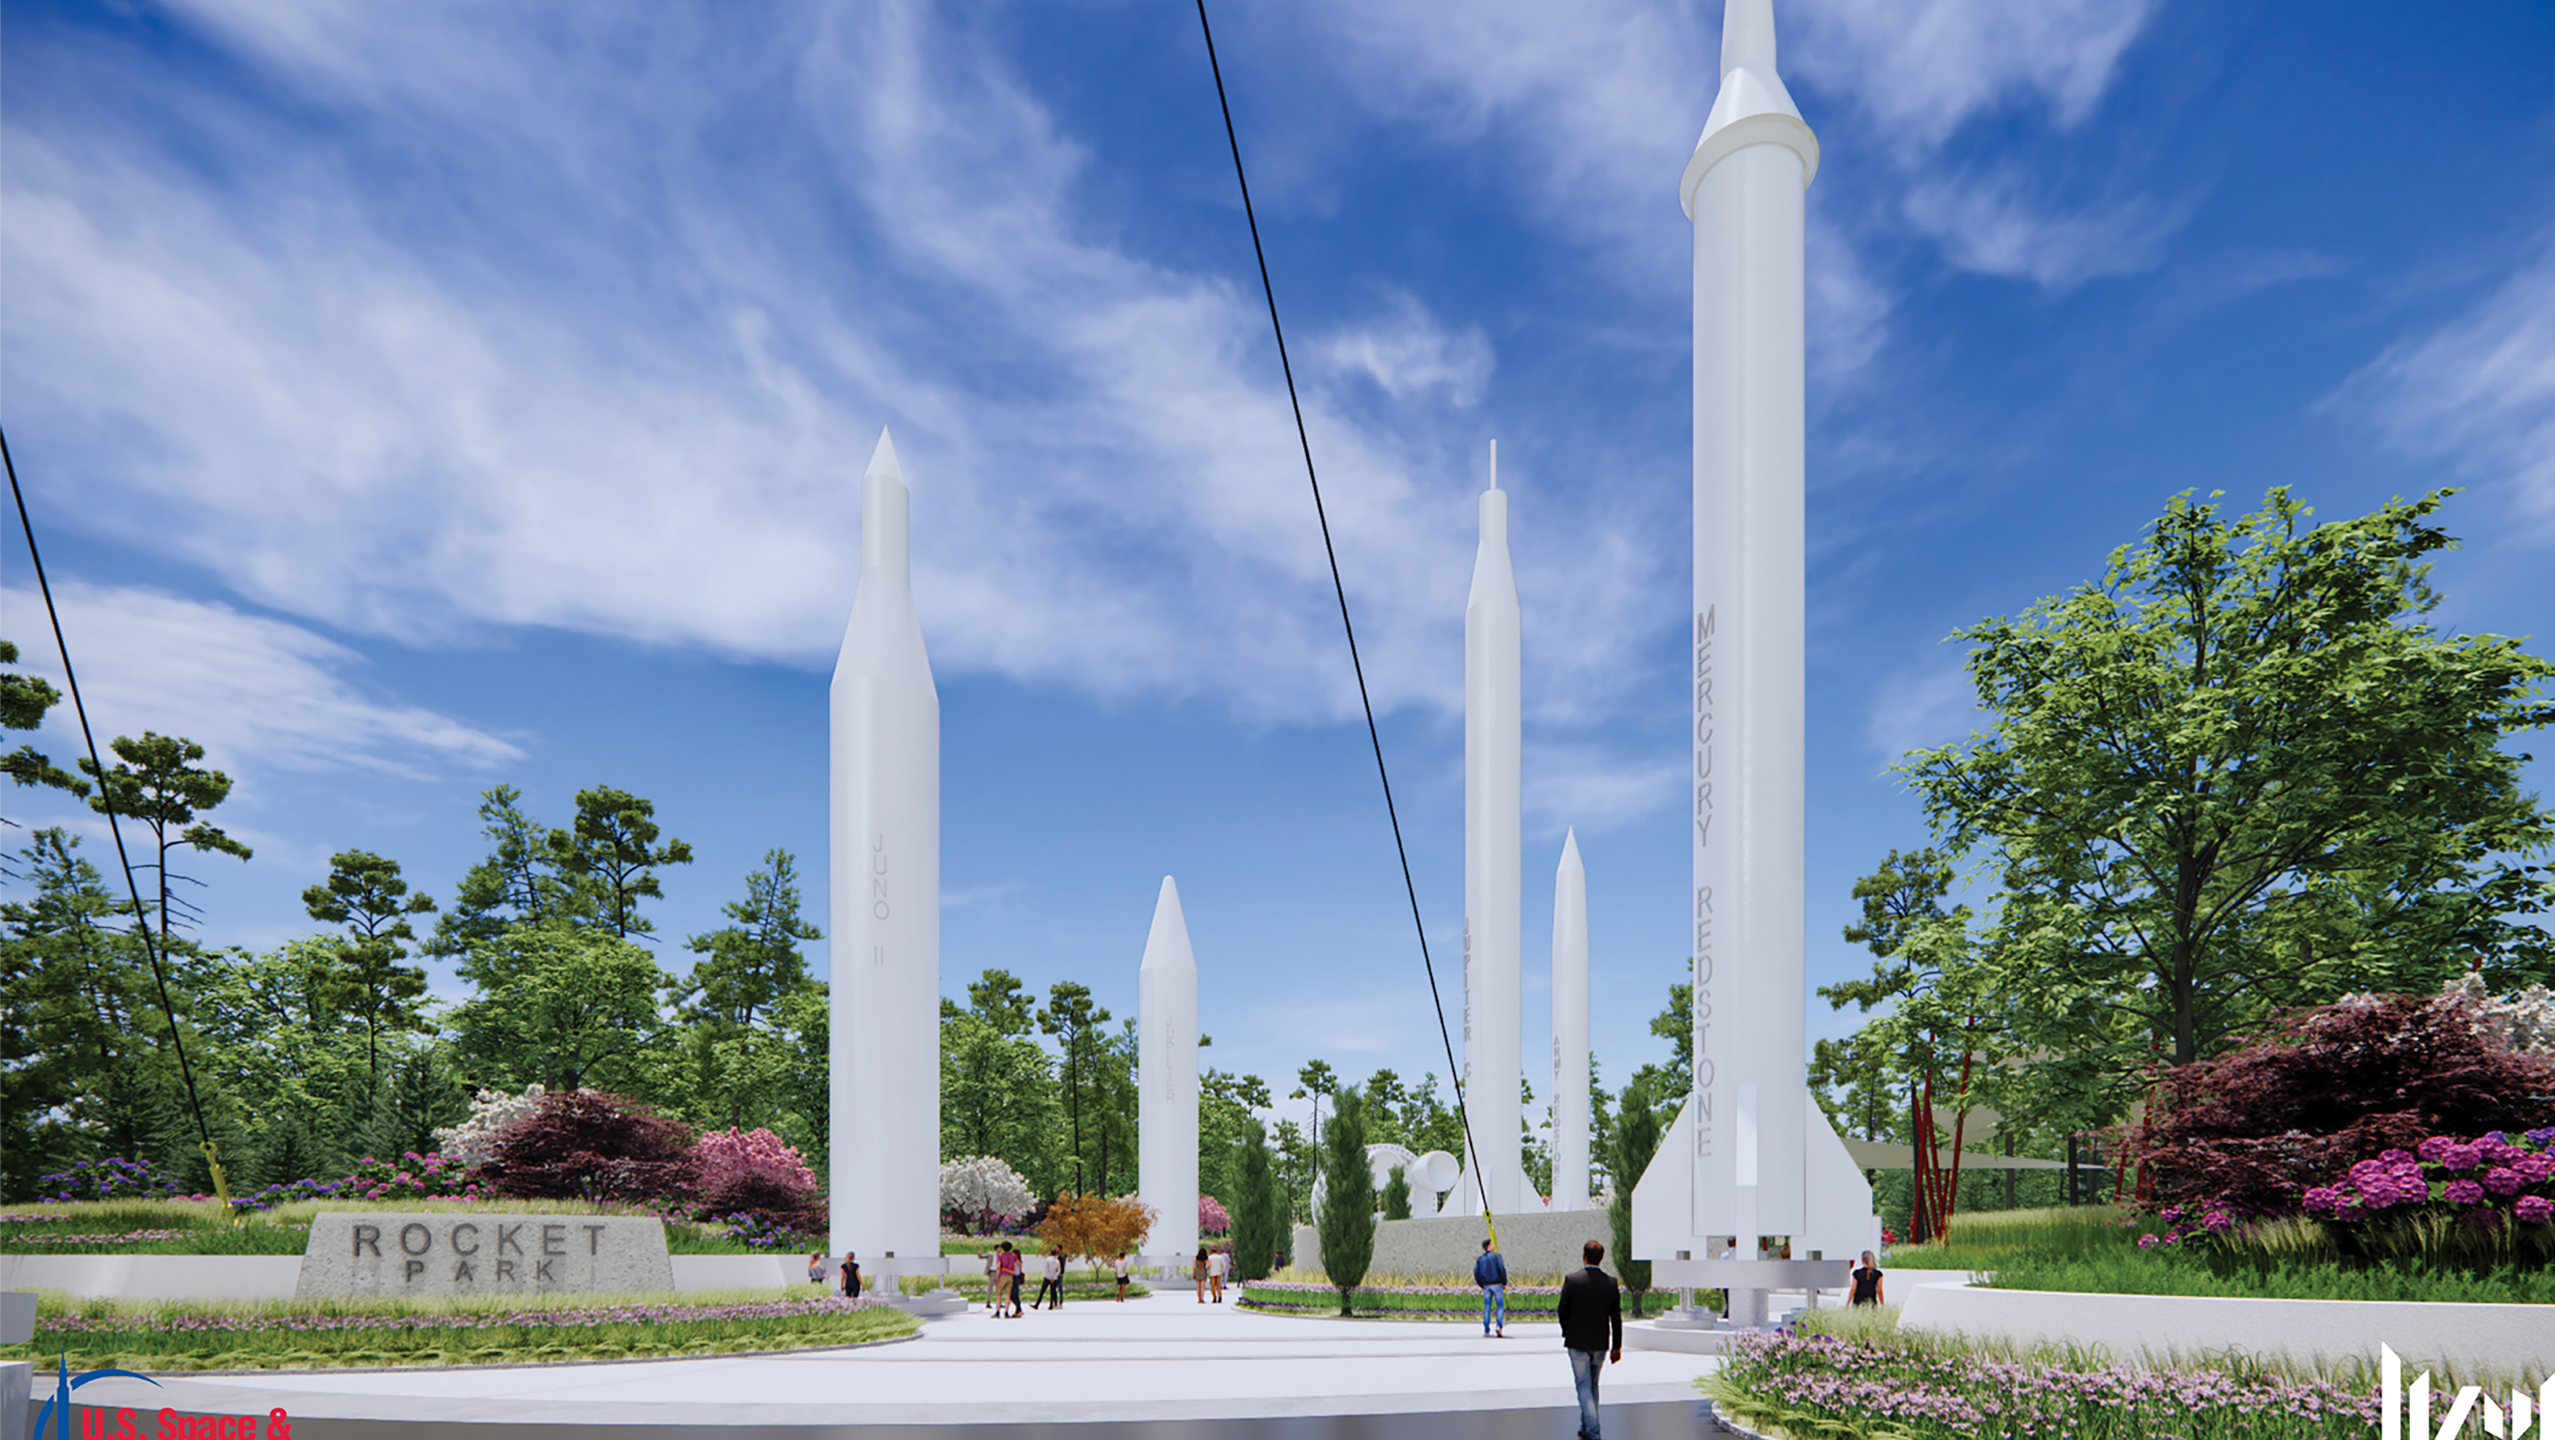 Proposed design for the new Rocket Park, phase 1.